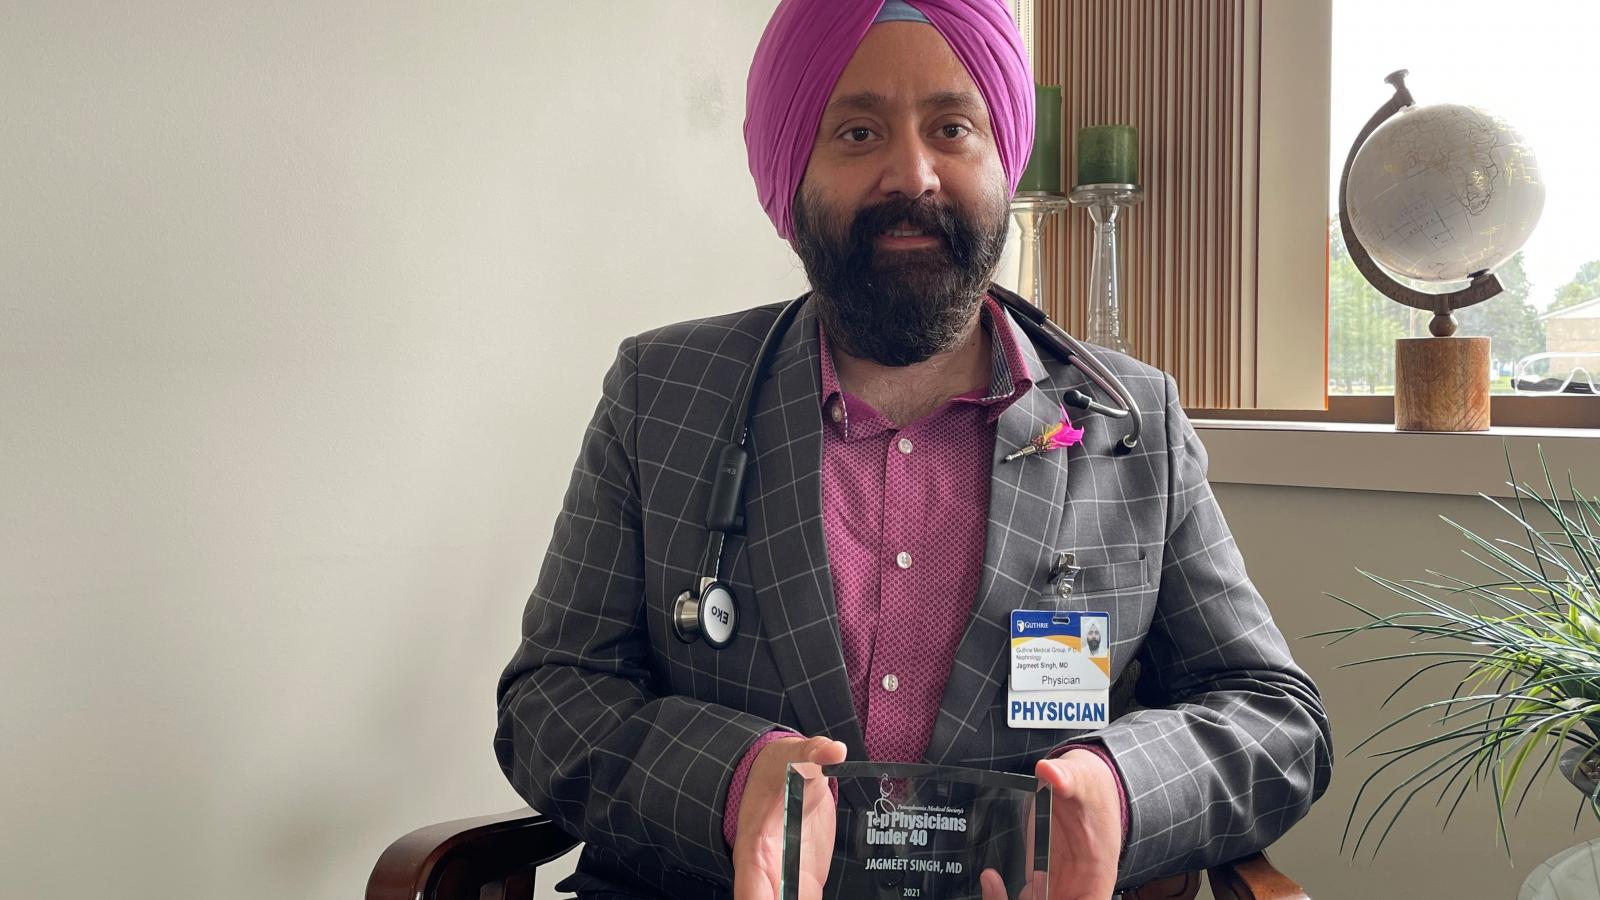 Dr. Jagmeet Singh Recognized as a 2021 Top Physician Under 40 